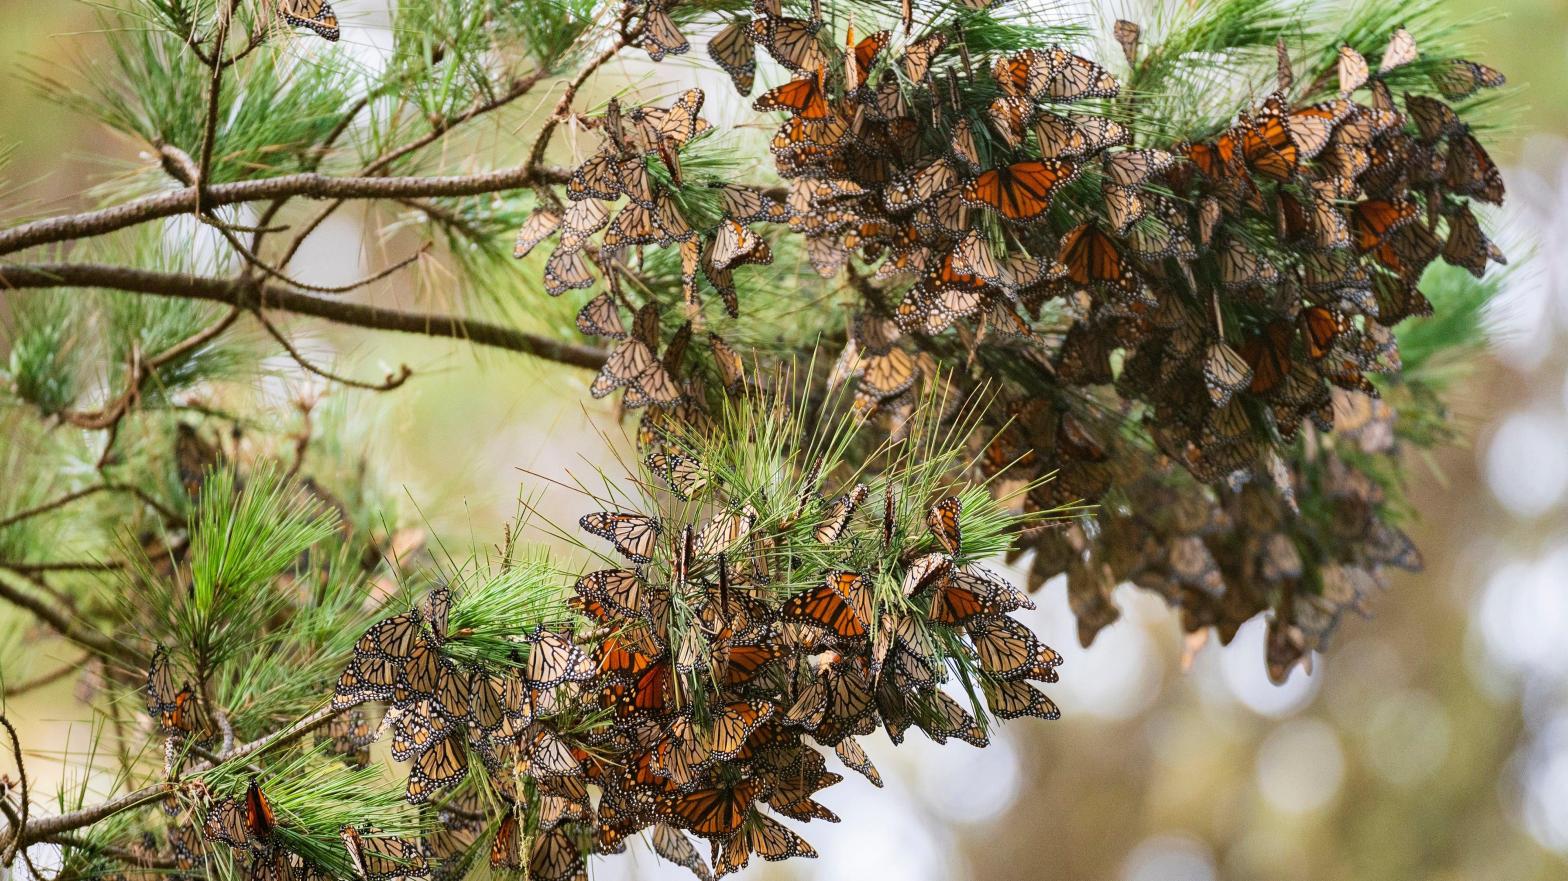 Western monarchs spend their winters clustered in trees along the California coast. Storms brought high winds and heavy precipitation to the region in December, damaging trees and killing butterflies.  (Photo: Nic Coury, AP)